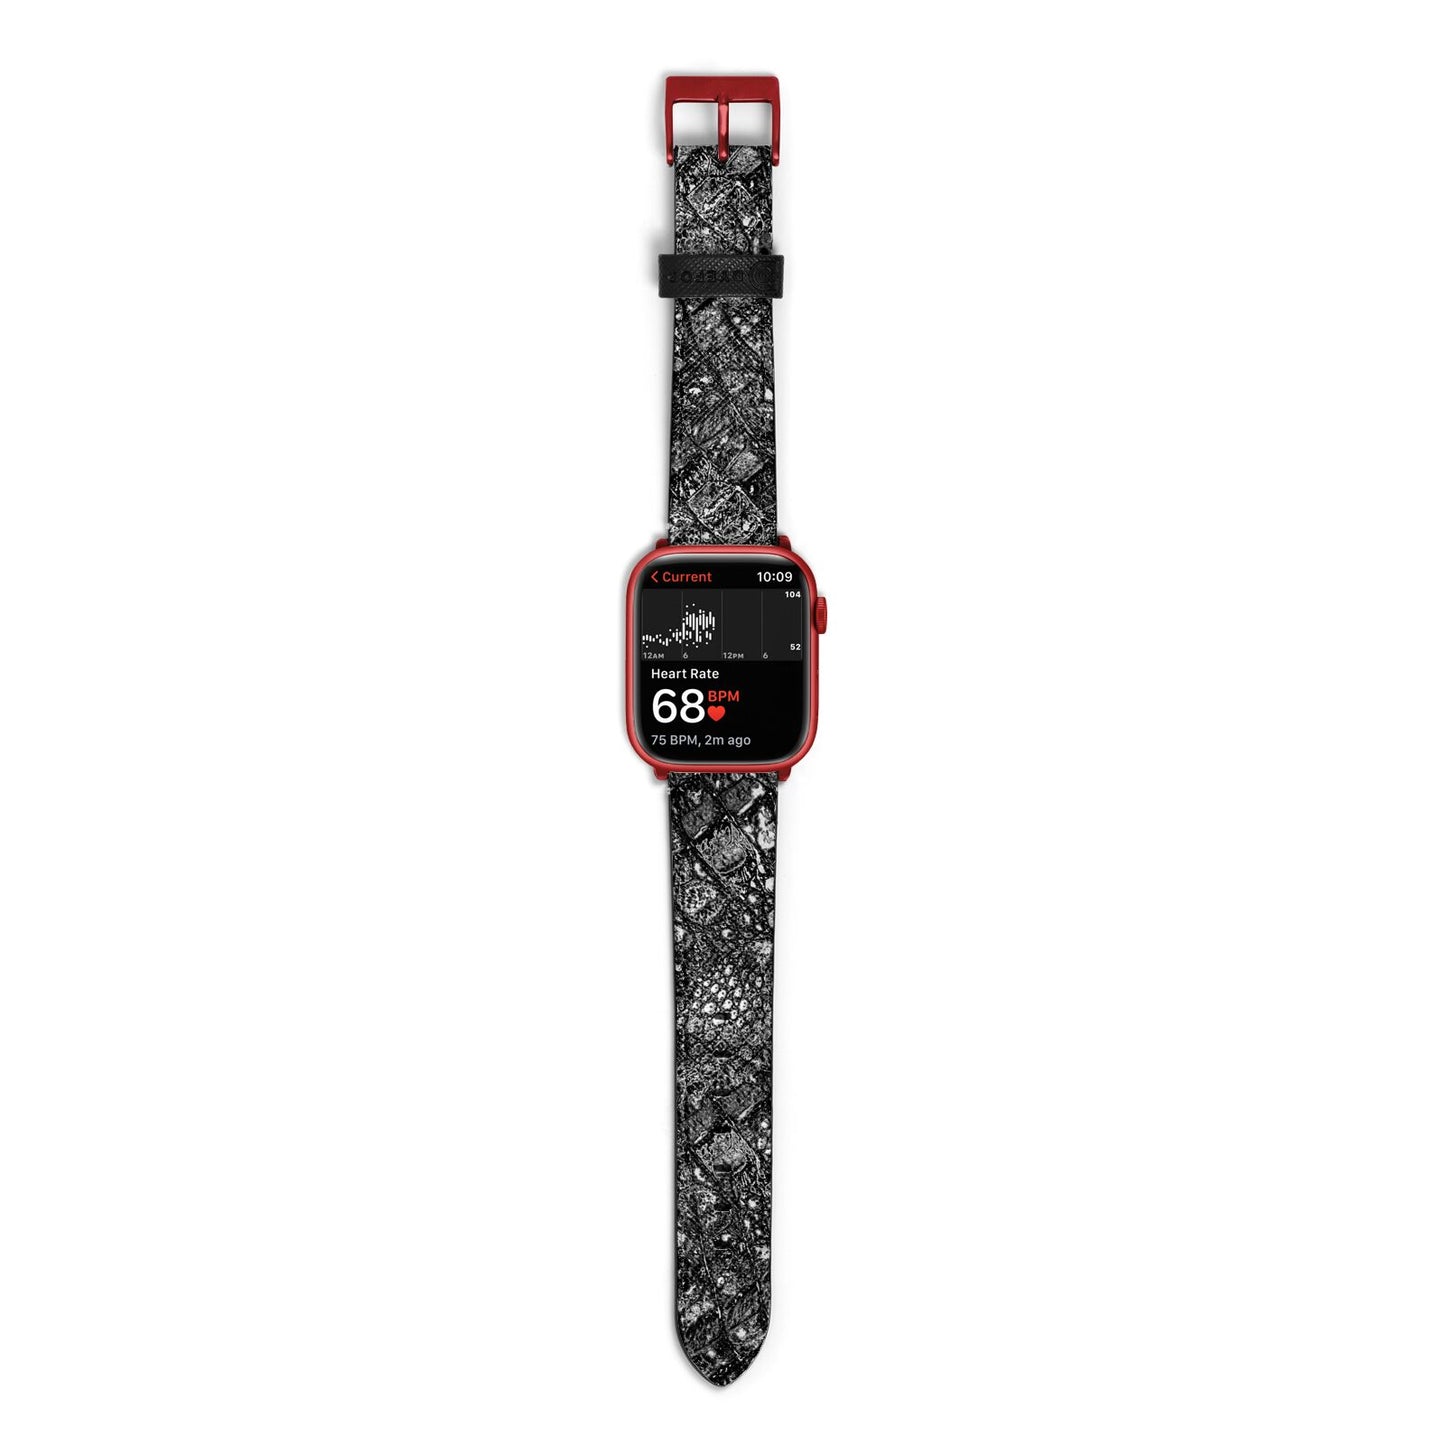 Snakeskin Design Apple Watch Strap Size 38mm with Red Hardware